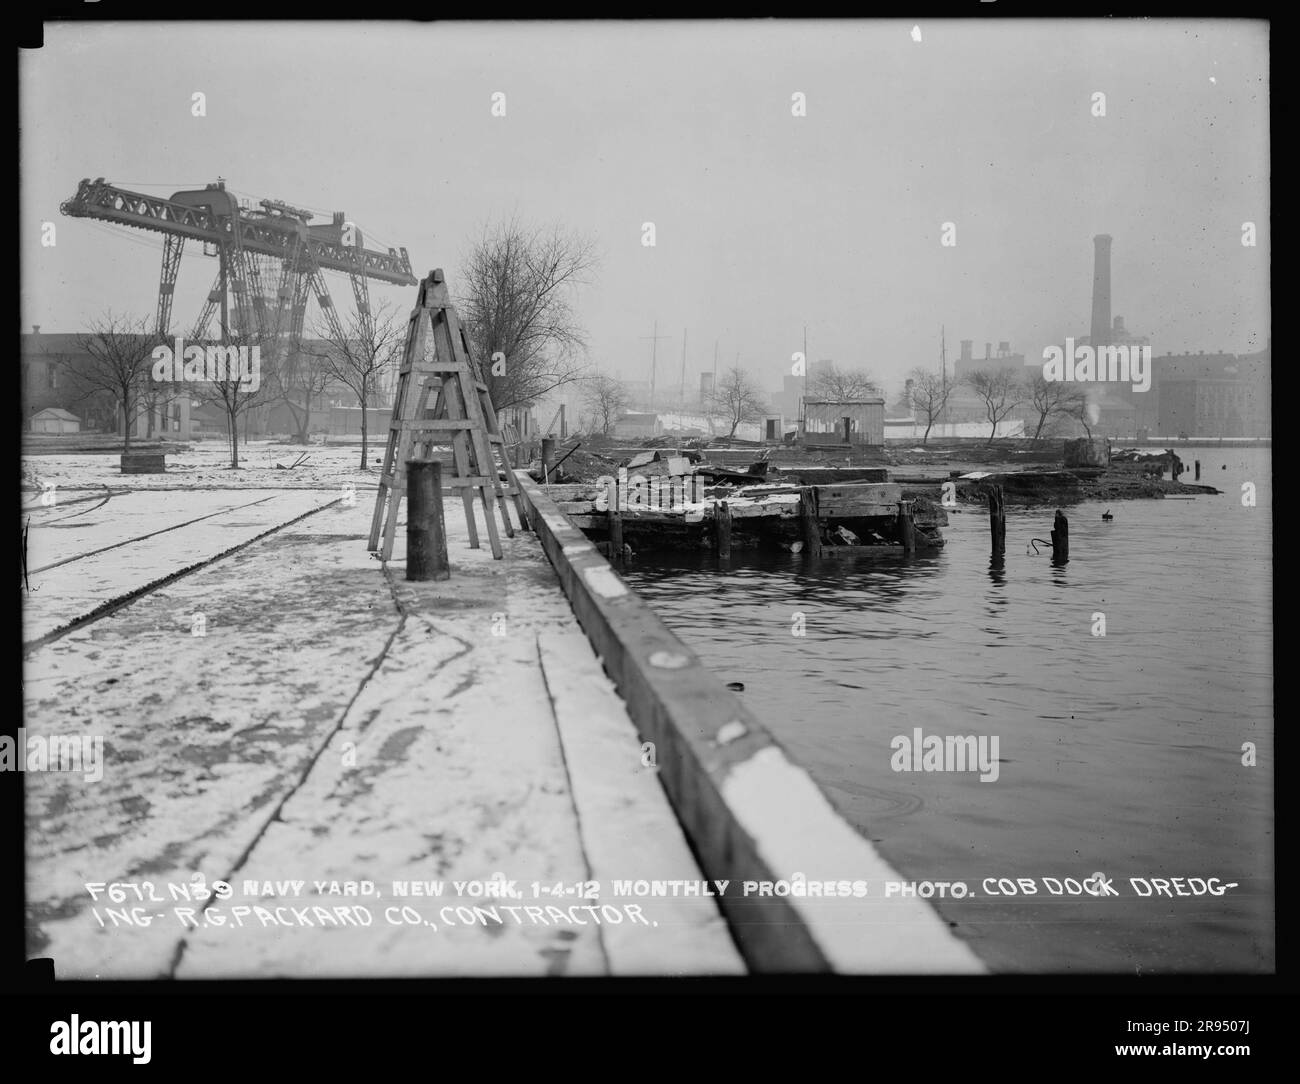 Monthly Progress Photo, Cob Dock Dredging, R. G. Packard Company, Contractor. Glass Plate Negatives of the Construction and Repair of Buildings, Facilities, and Vessels at the New York Navy Yard. Stock Photo